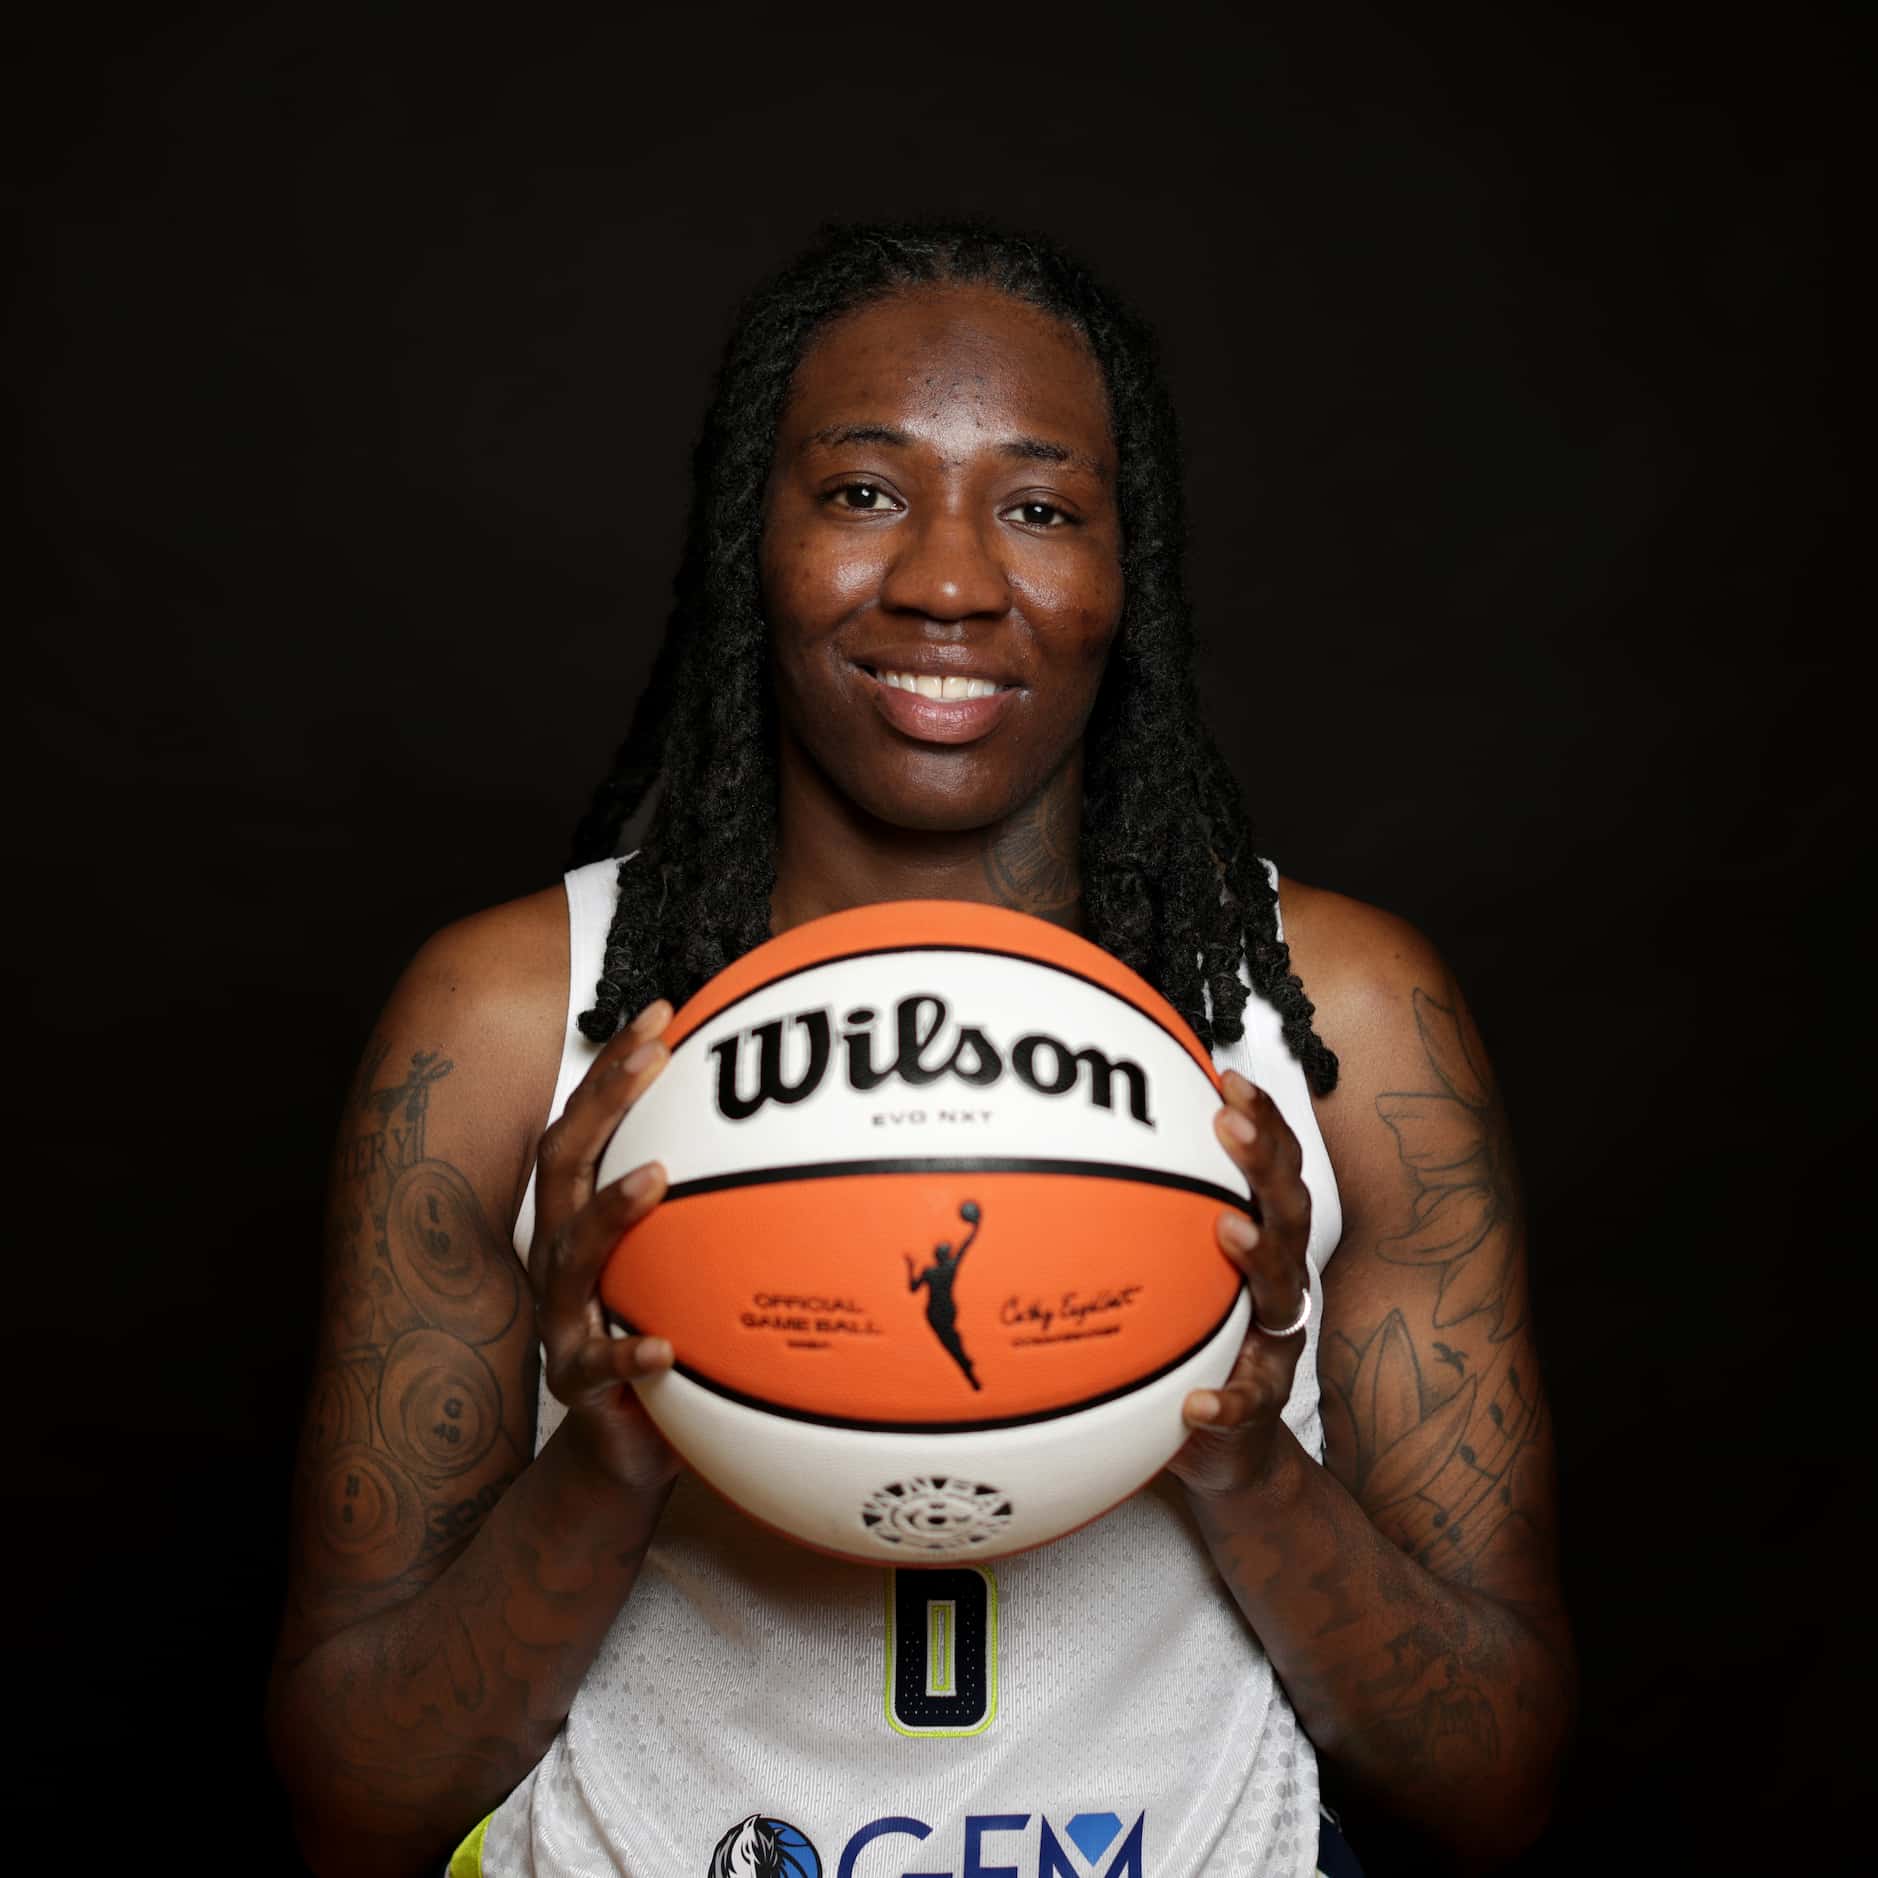 #6 Natasha Howard with The Dallas Wings poses for a photograph at College Park Center in...